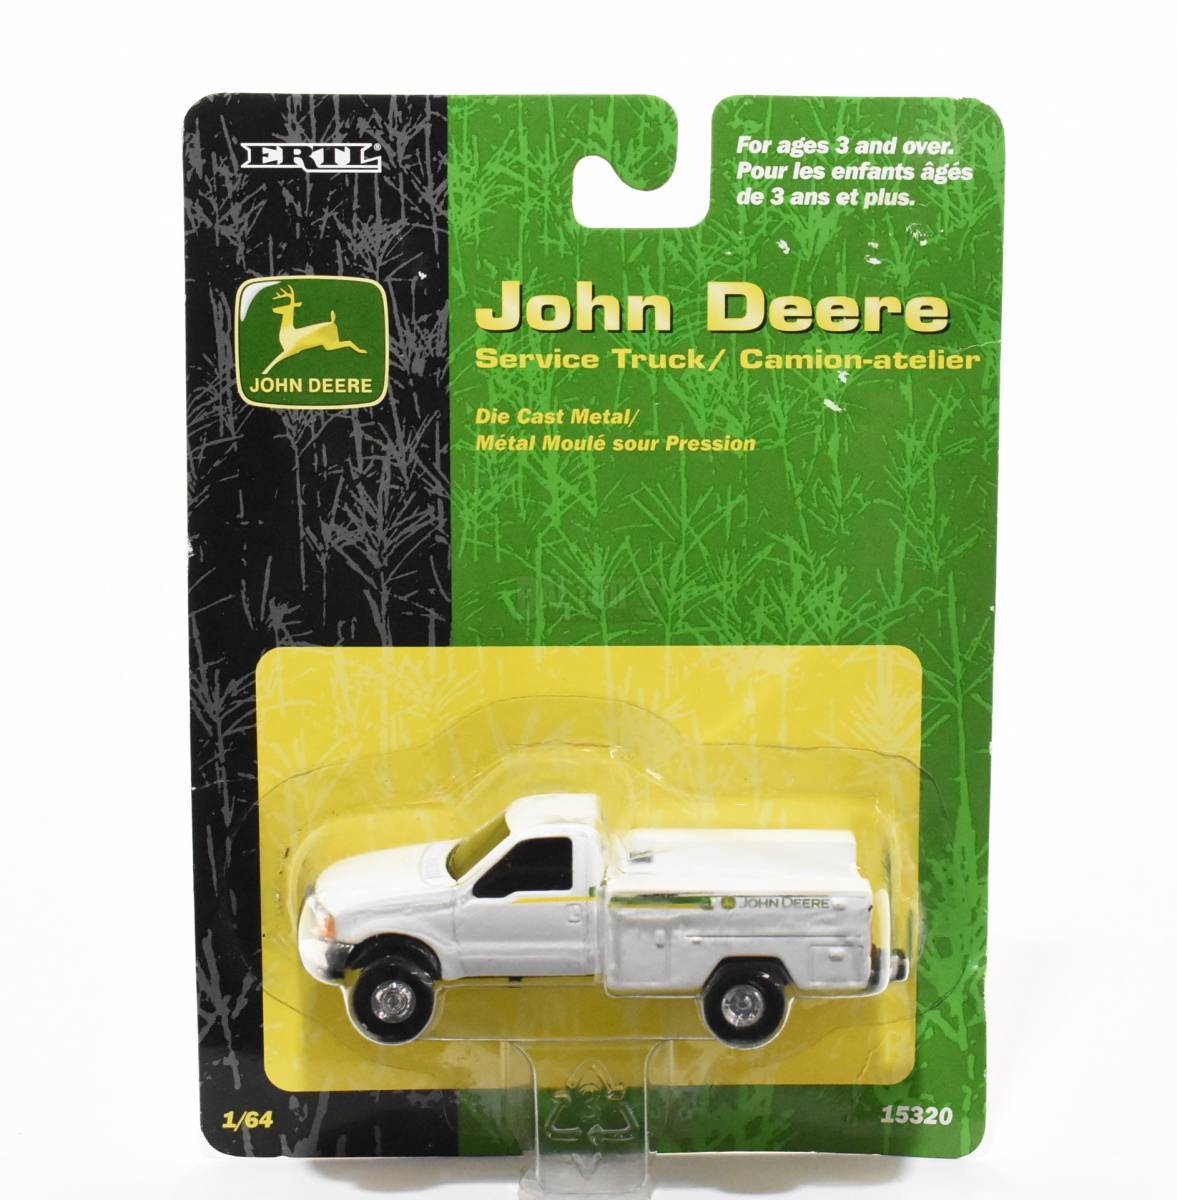 John Deere 1/64 Scale Ford F-350 Service Truck Toy Lp64410 for sale online 